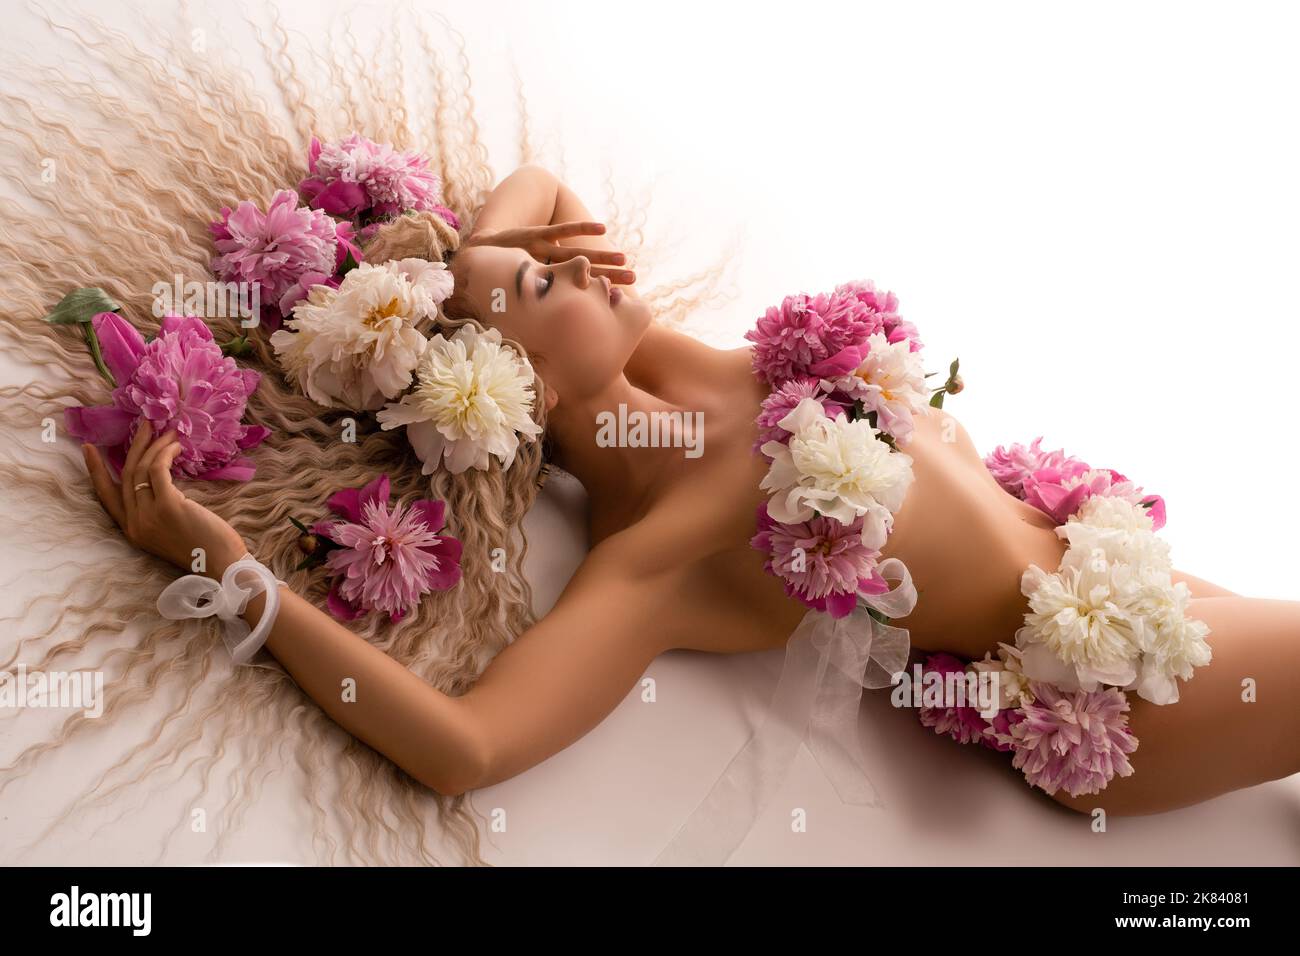 Sensual naked lady with flowers on body lying on bed Stock Photo